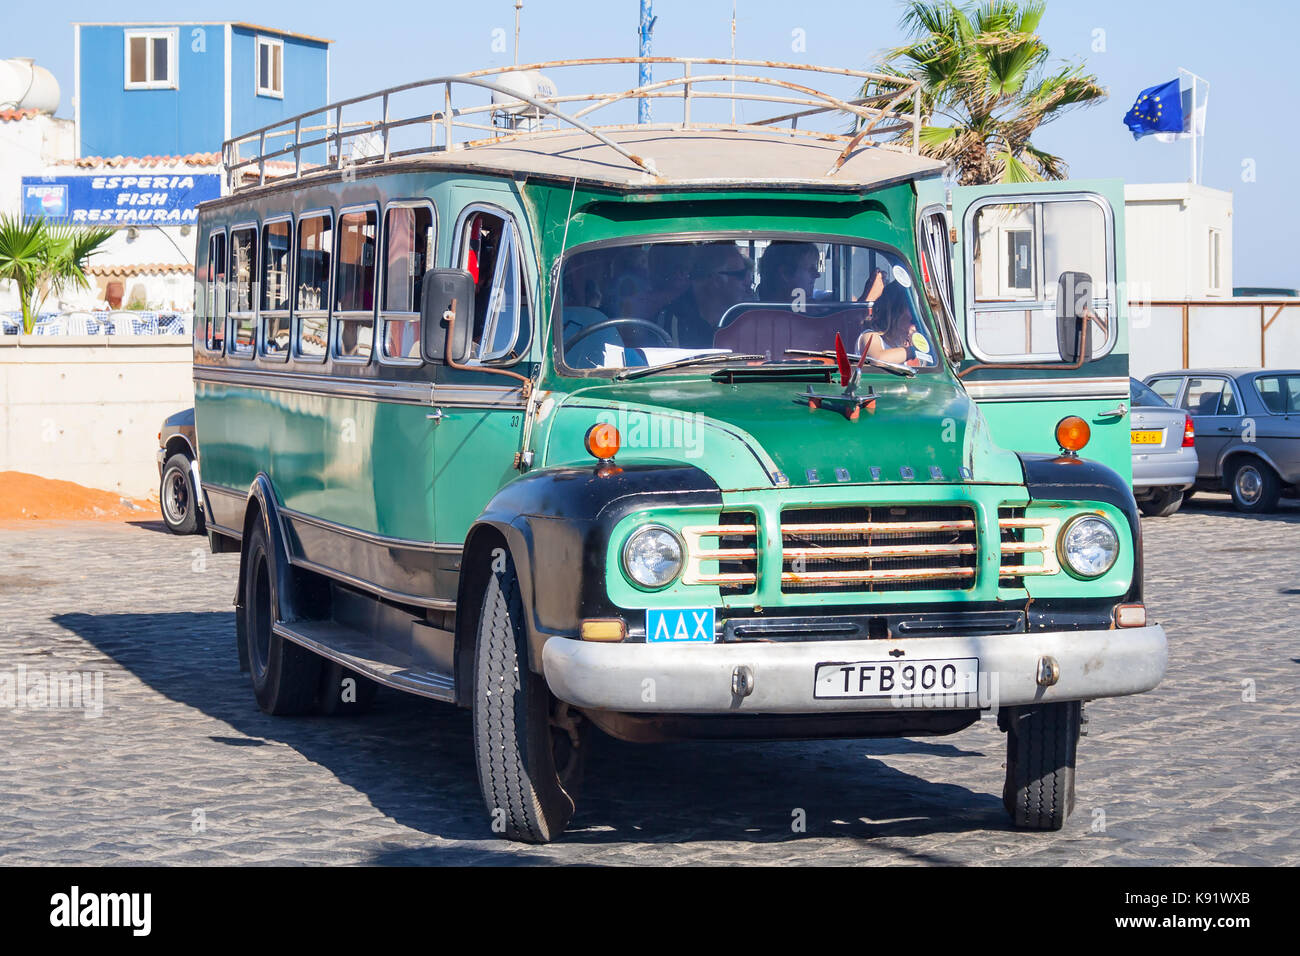 A view of an old Bedford minibus in Ayia Napa, Cyprus. Stock Photo